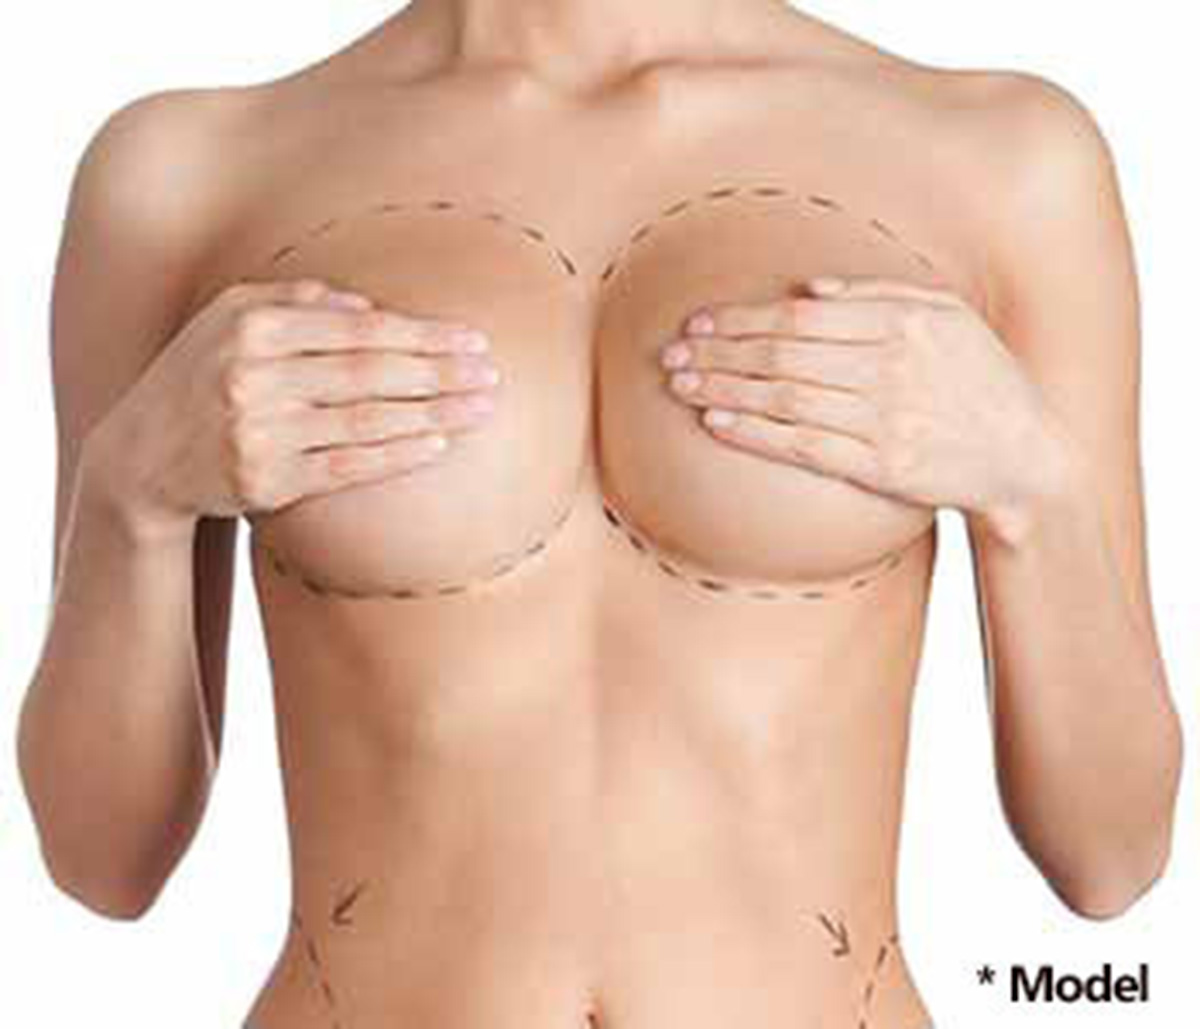 Beverly Hills specialist discusses long-term breast surgery